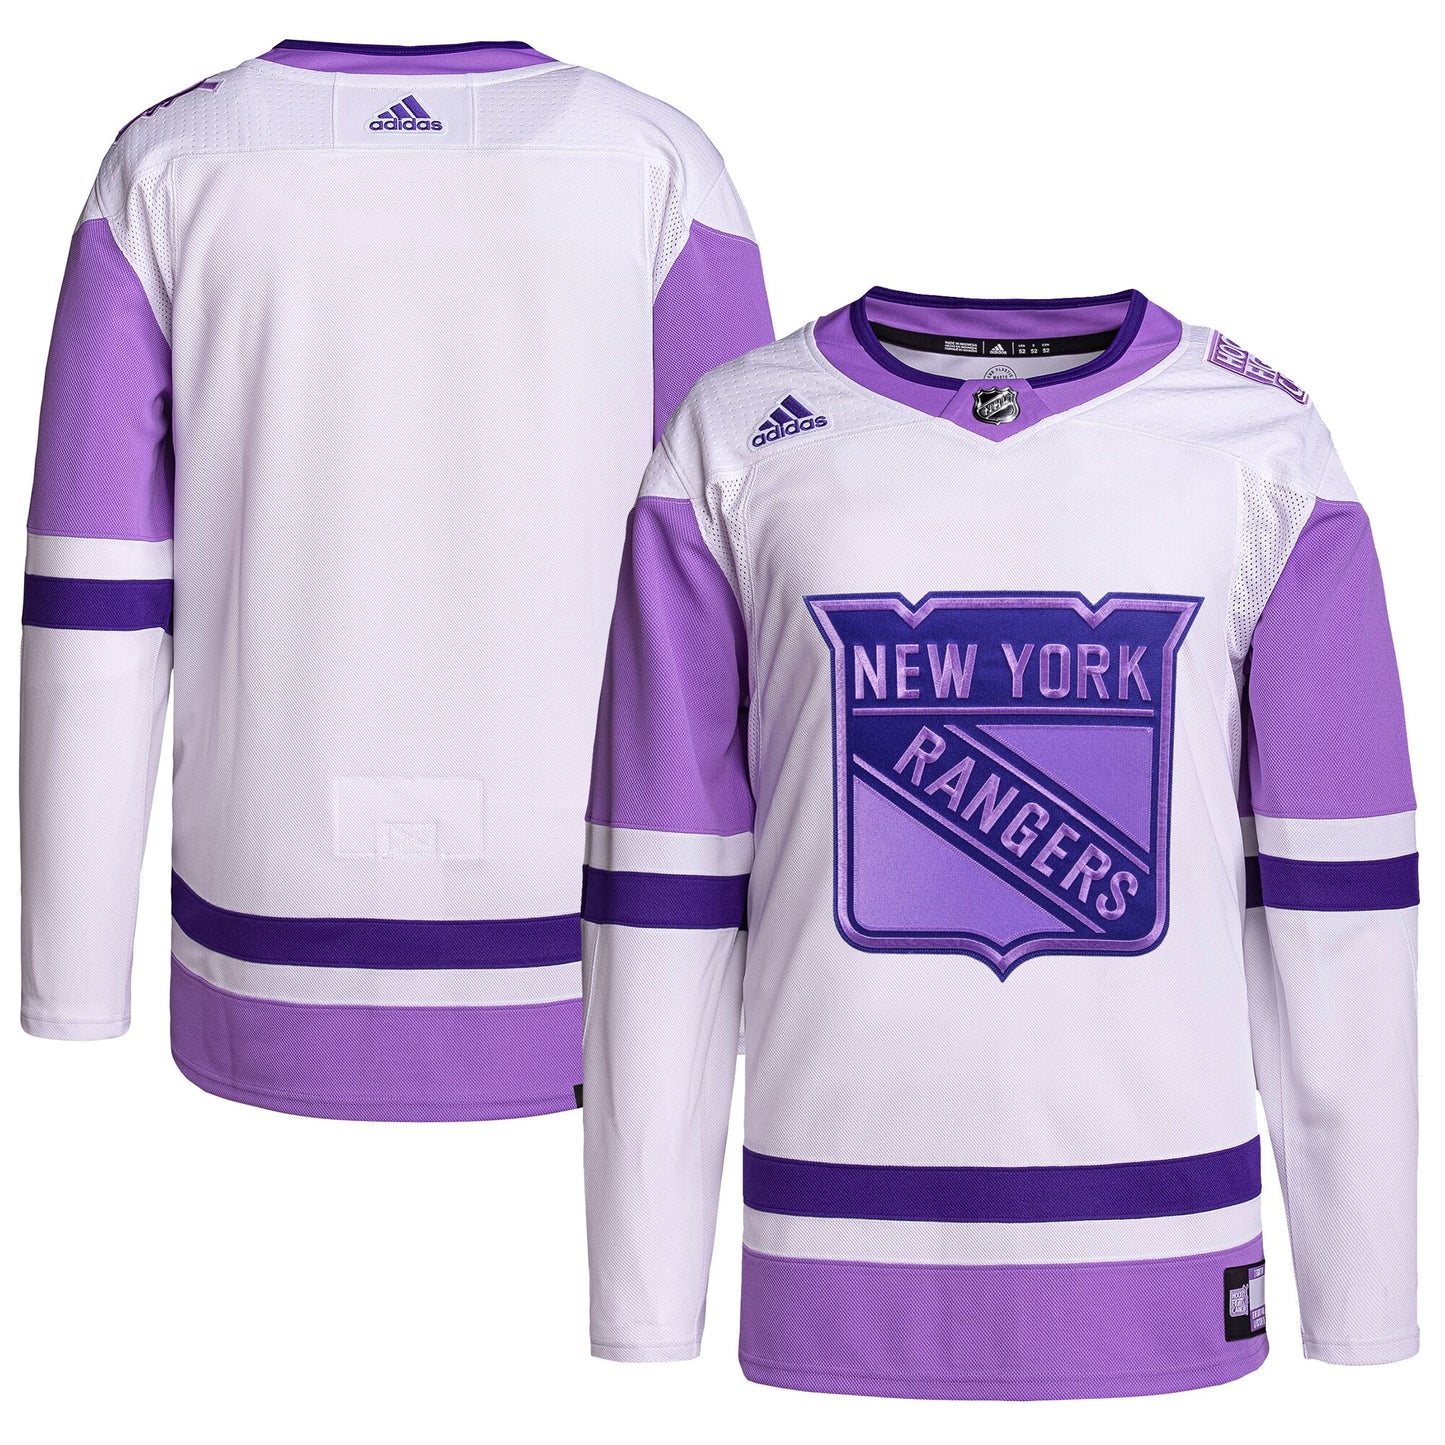 New York Rangers adidas Hockey Fights Cancer Primegreen Authentic Blank Practice Jersey - White/Purple